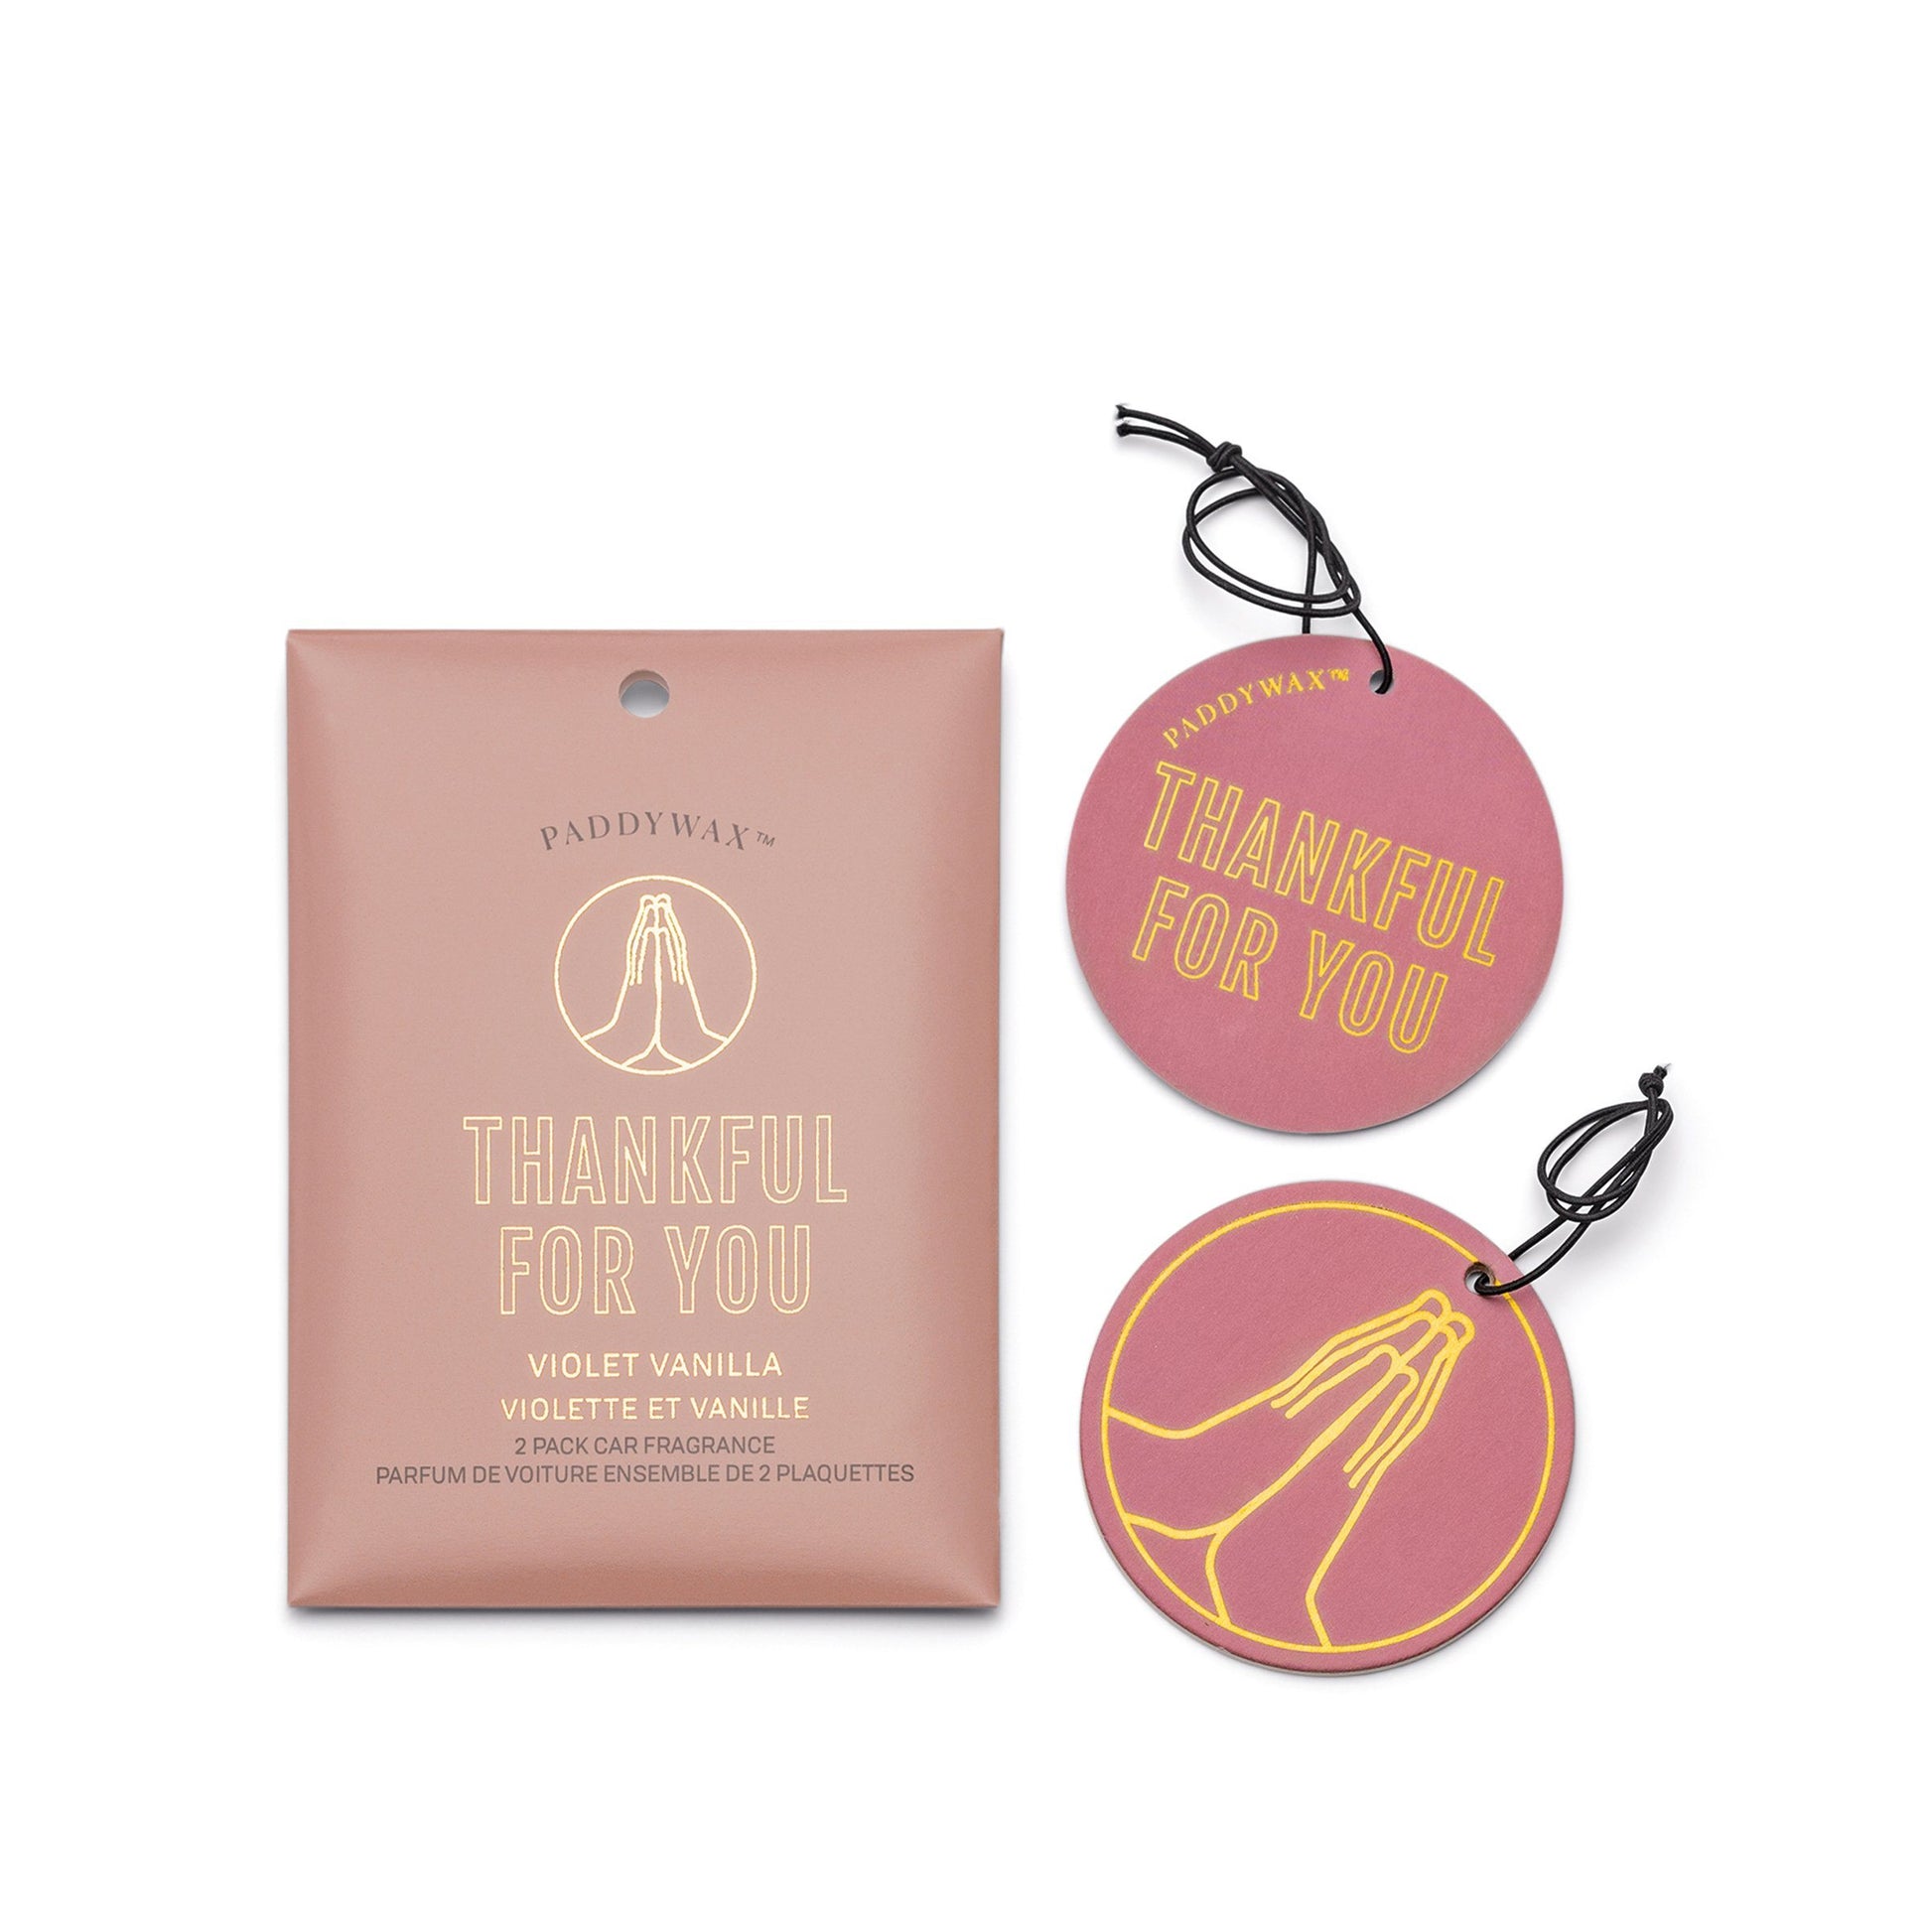 Impressions Car Fragrance - Violet Vanilla "Thankful For You" - dark pink colored with gold outline